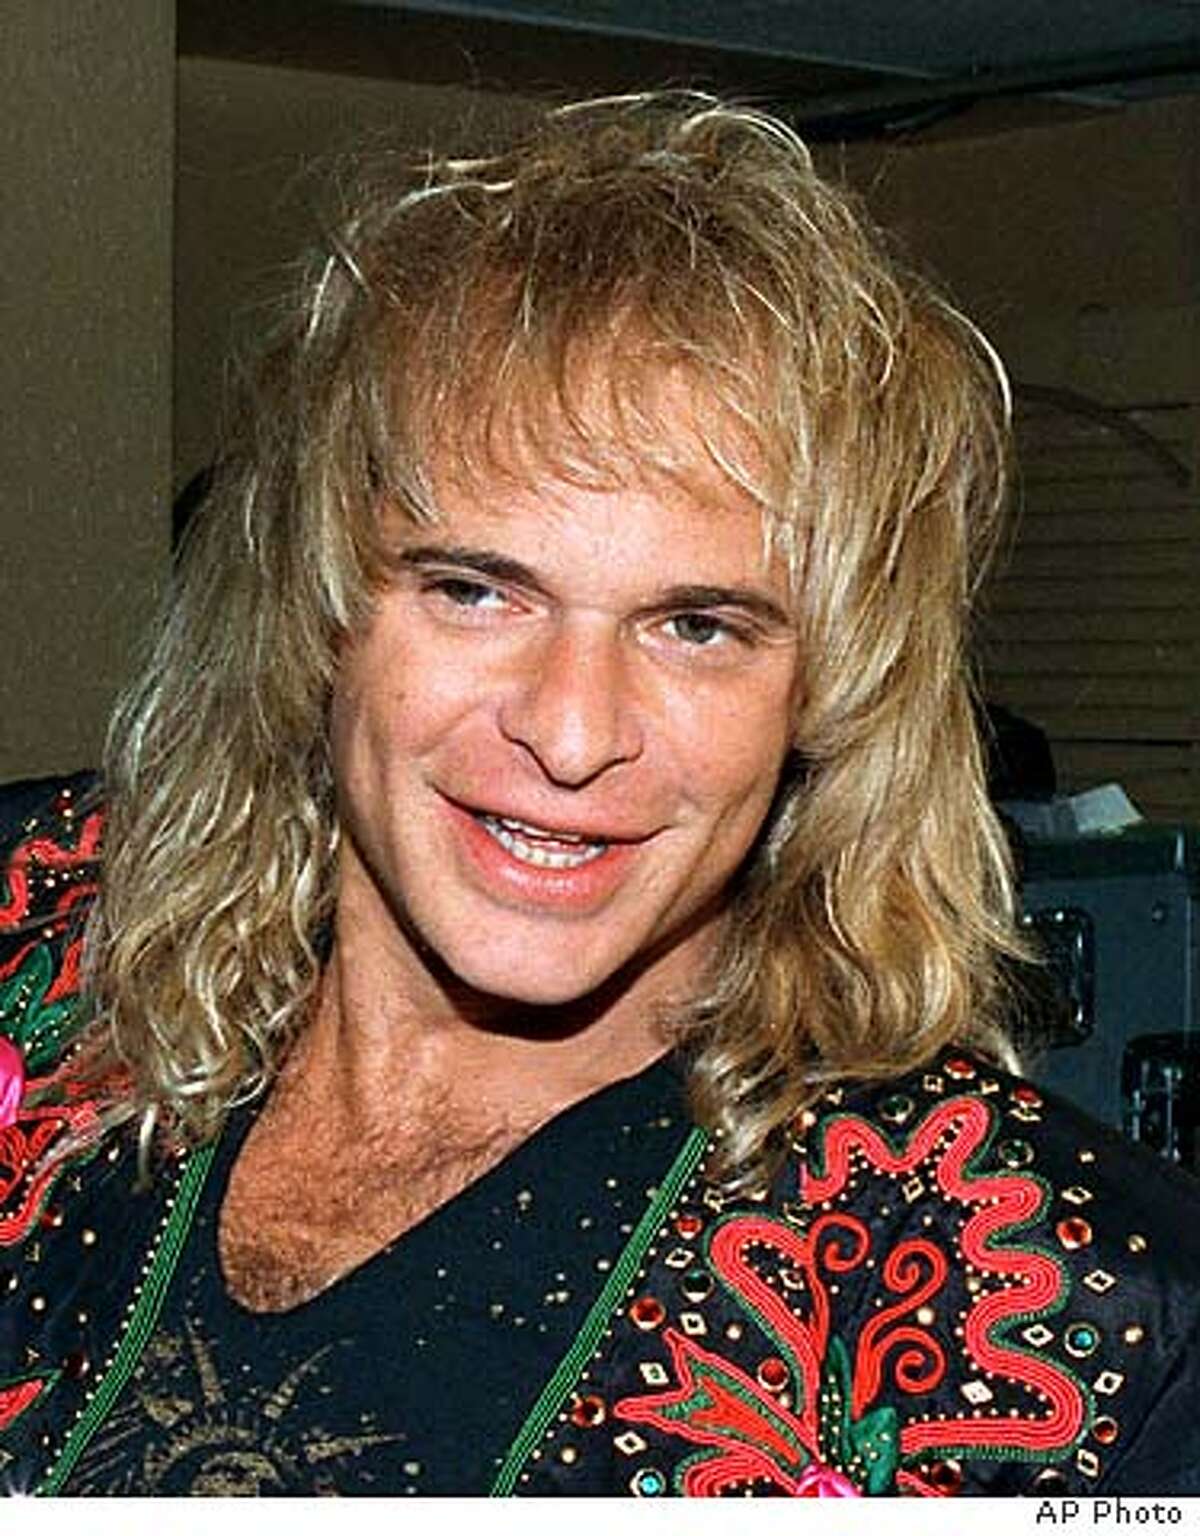 David Lee Roth / Just a 47-year-old gigolo